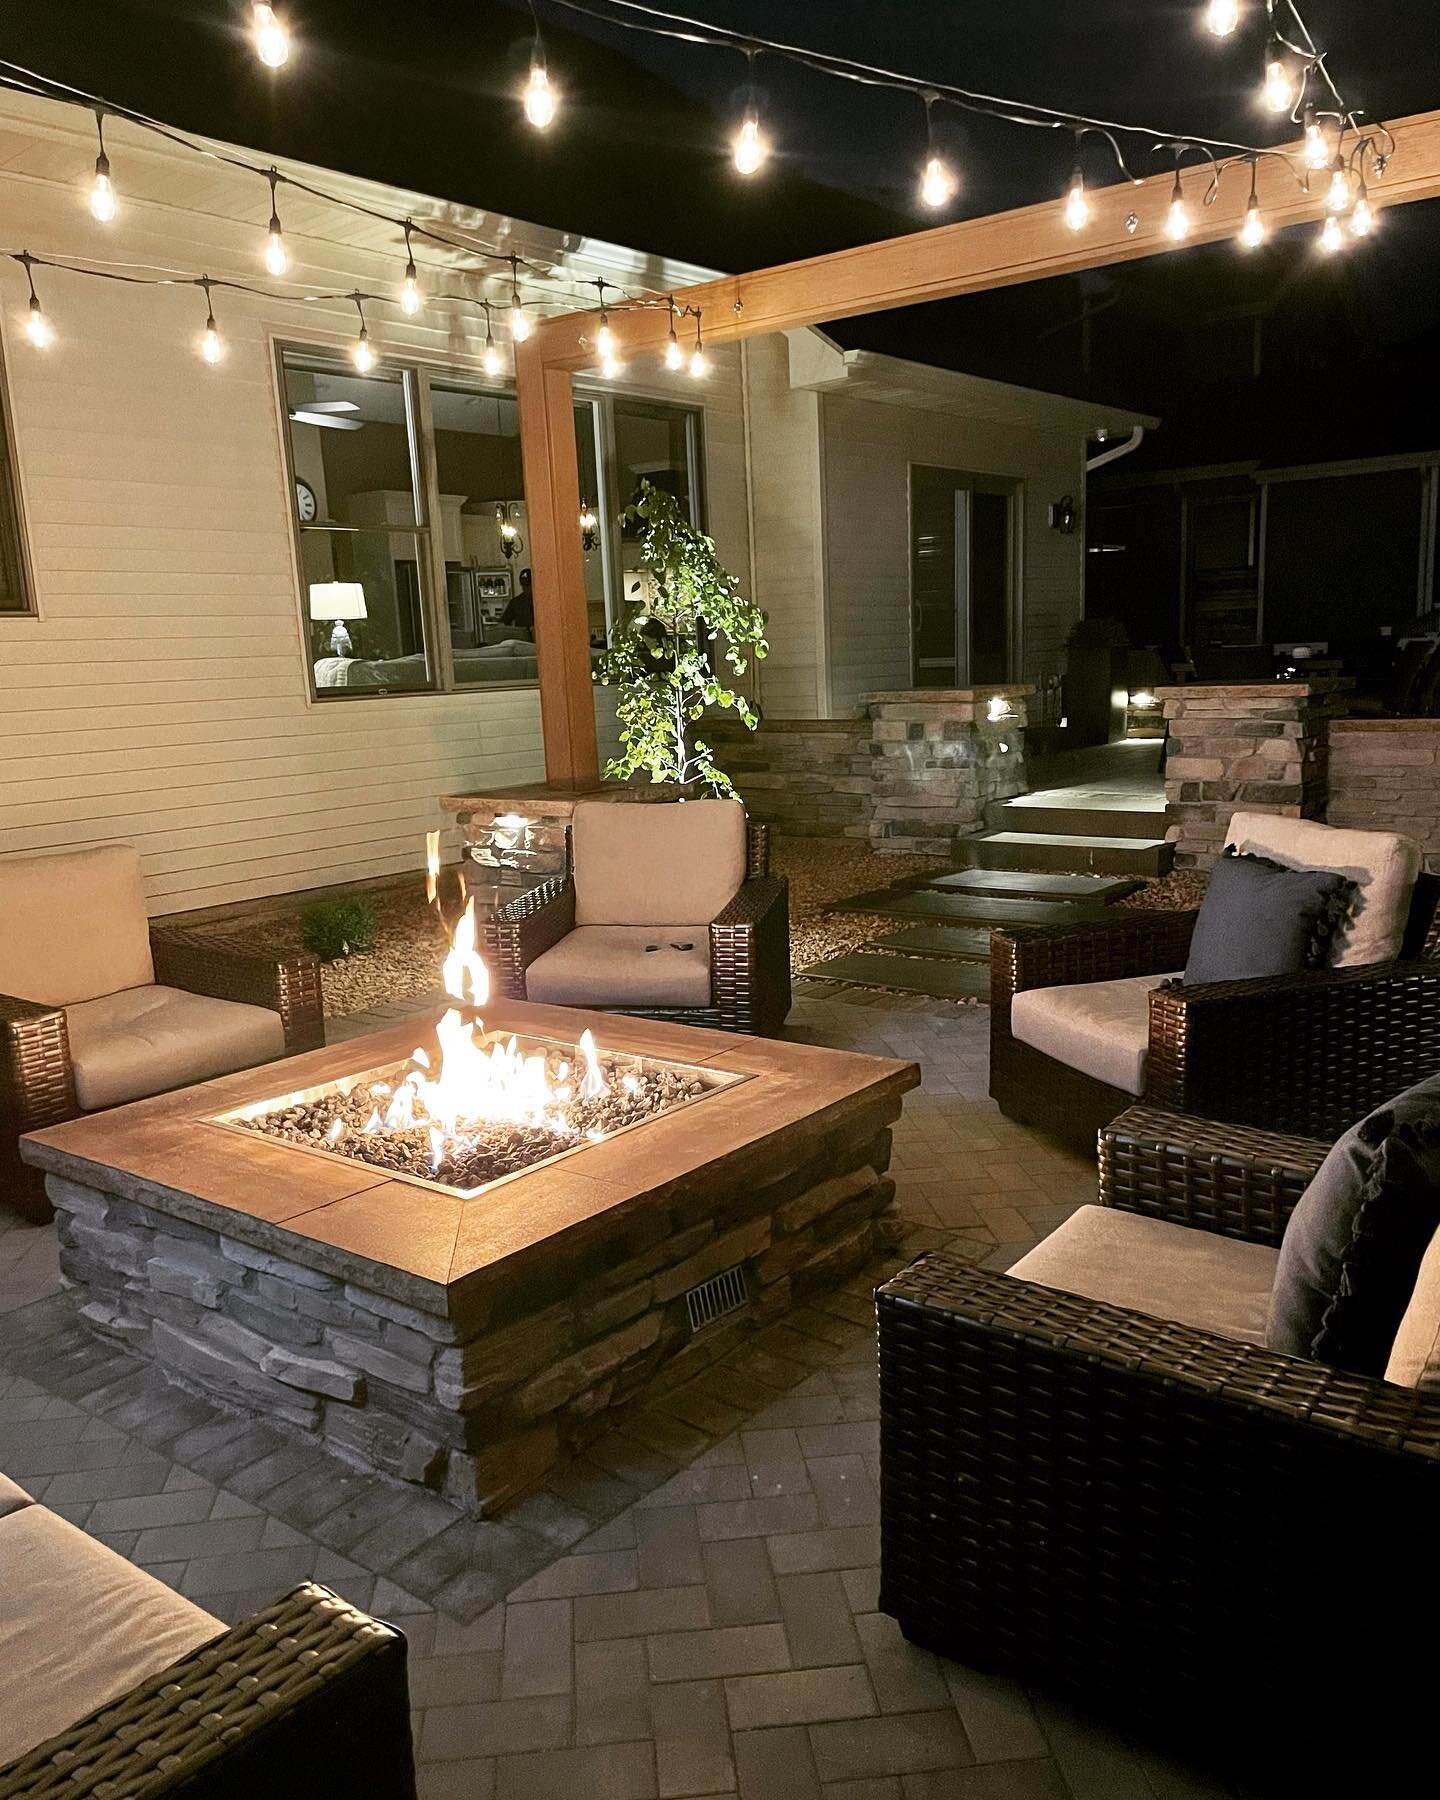 Hang around the 🔥 during these cooler nights!  We offer both wood burning &amp; gas systems; send us a DM to have one installed this season. 
#firegearoutdoors #warmingtrends #firepit